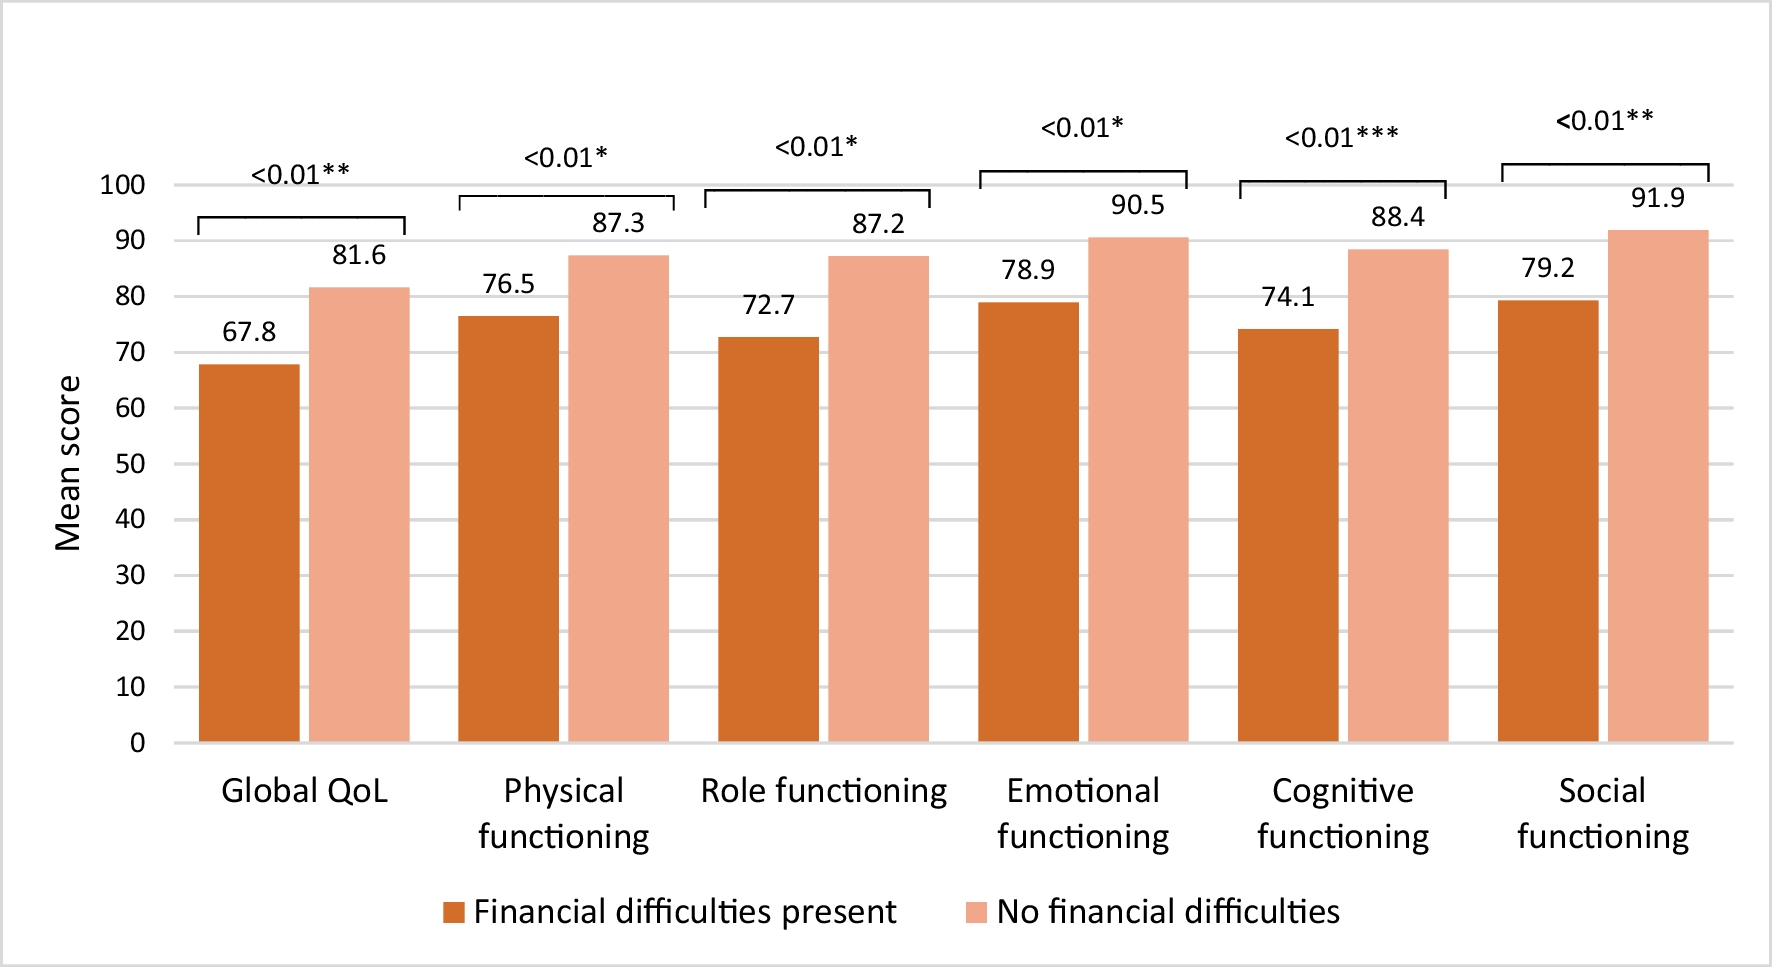 Financial difficulties experienced by patients with gastrointestinal stromal tumours (GIST) in the Netherlands: data from a cross-sectional multicentre study